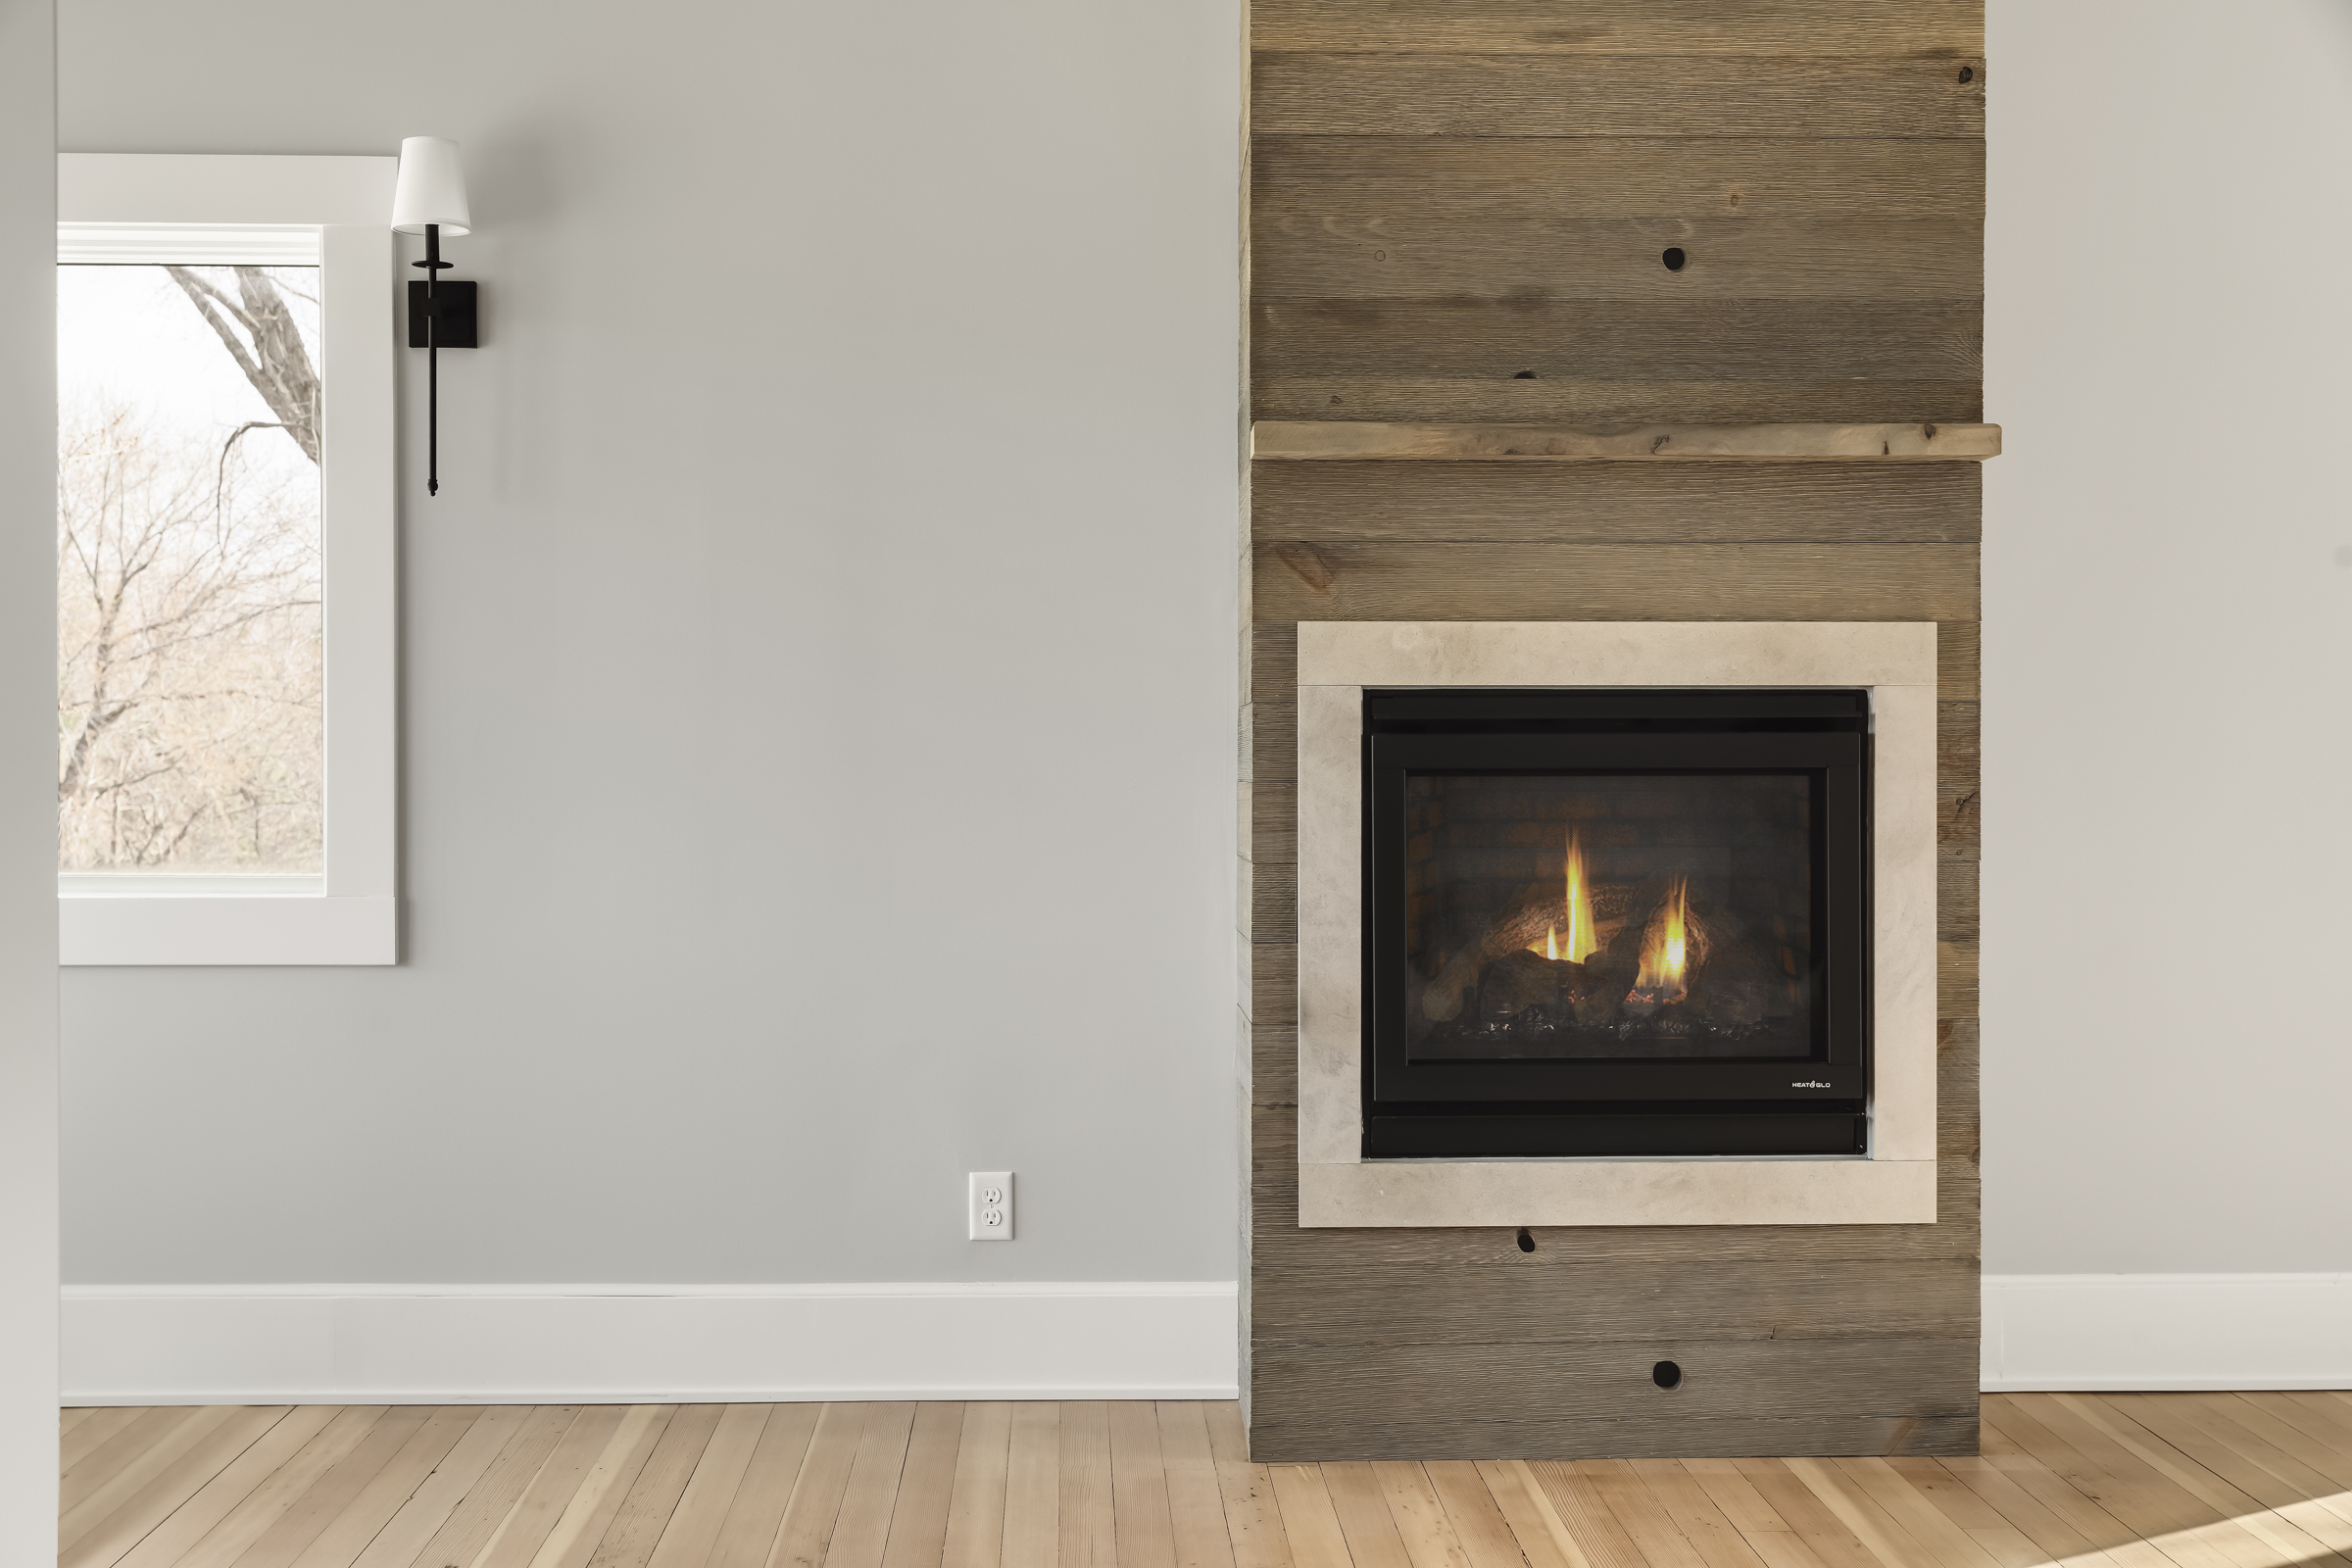 New Heat & Glo gas fireplace with Forever Barnwood weathered barn wood. 